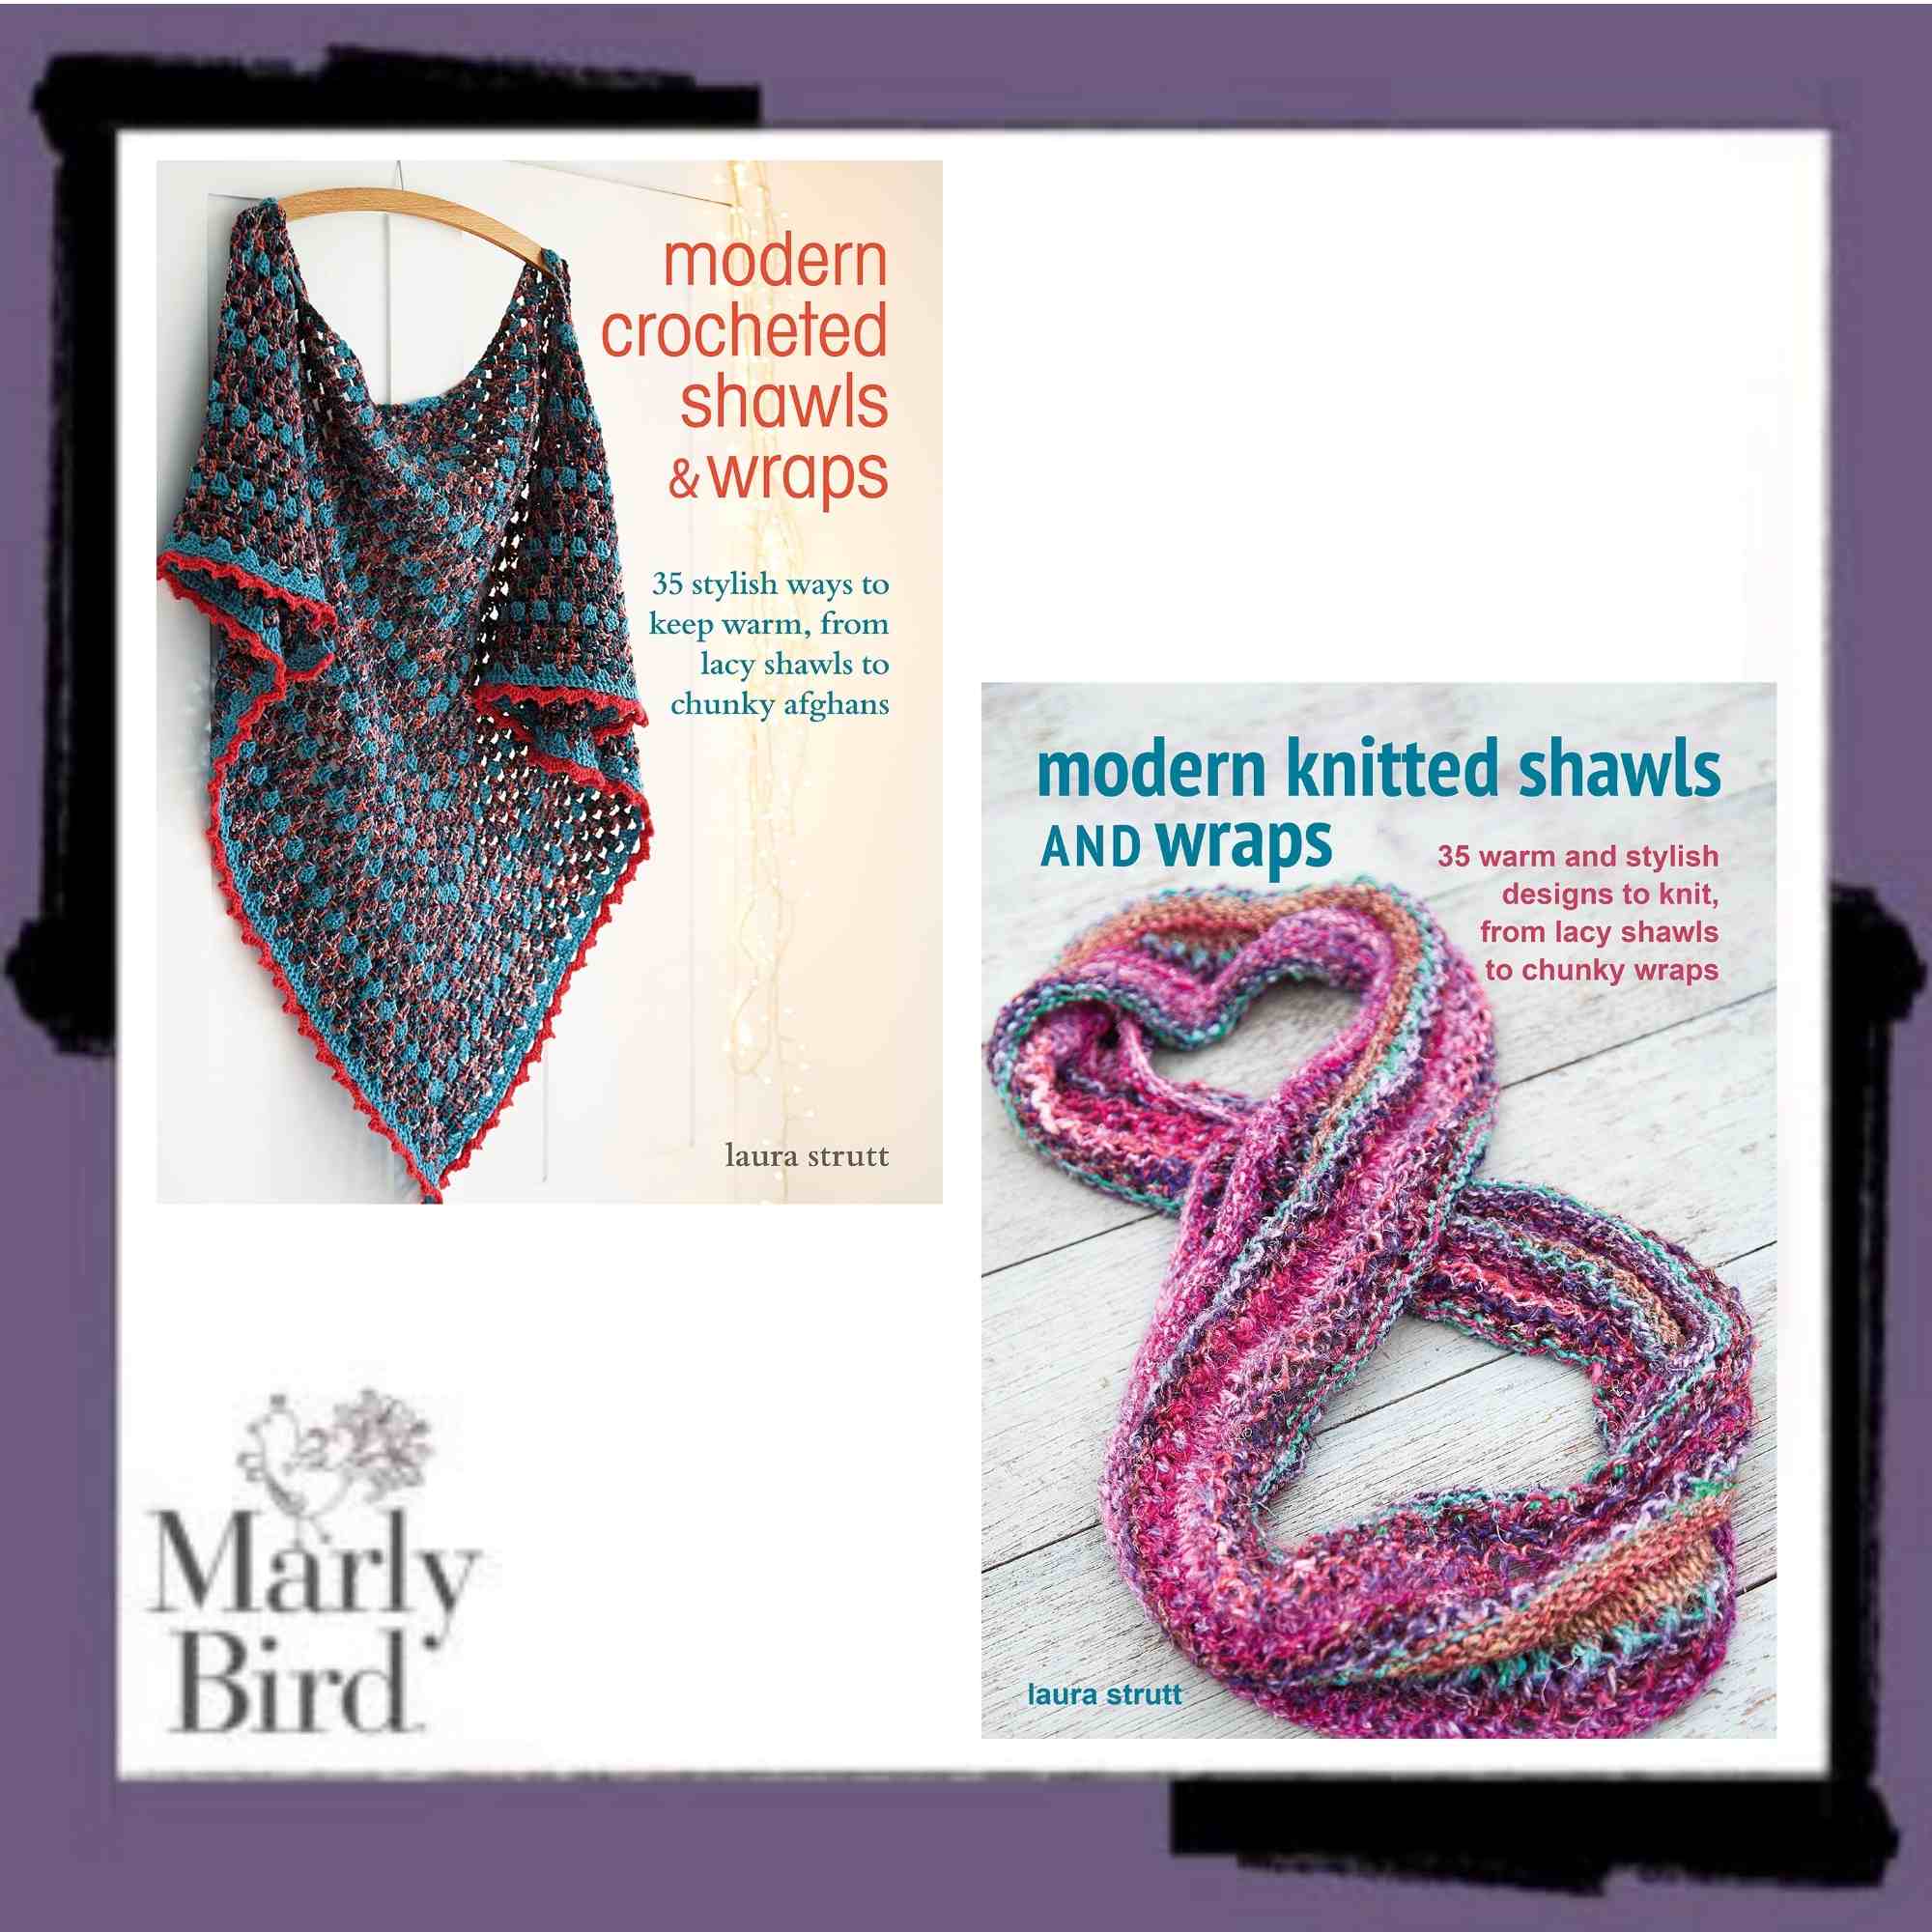 2022 crochet and knit books for your craft library